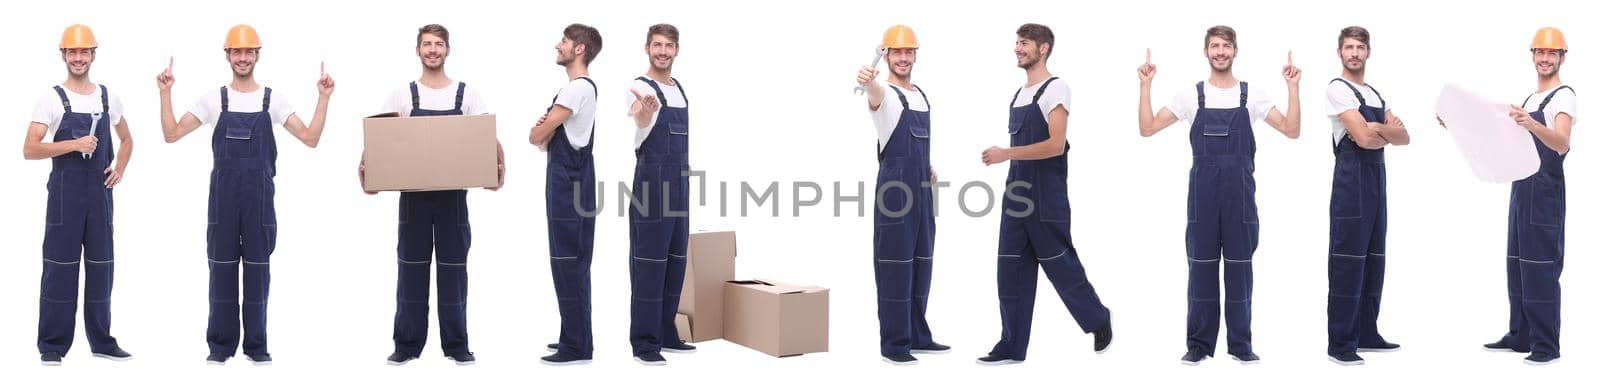 in full growth. skilled handyman isolated on white. photo collage